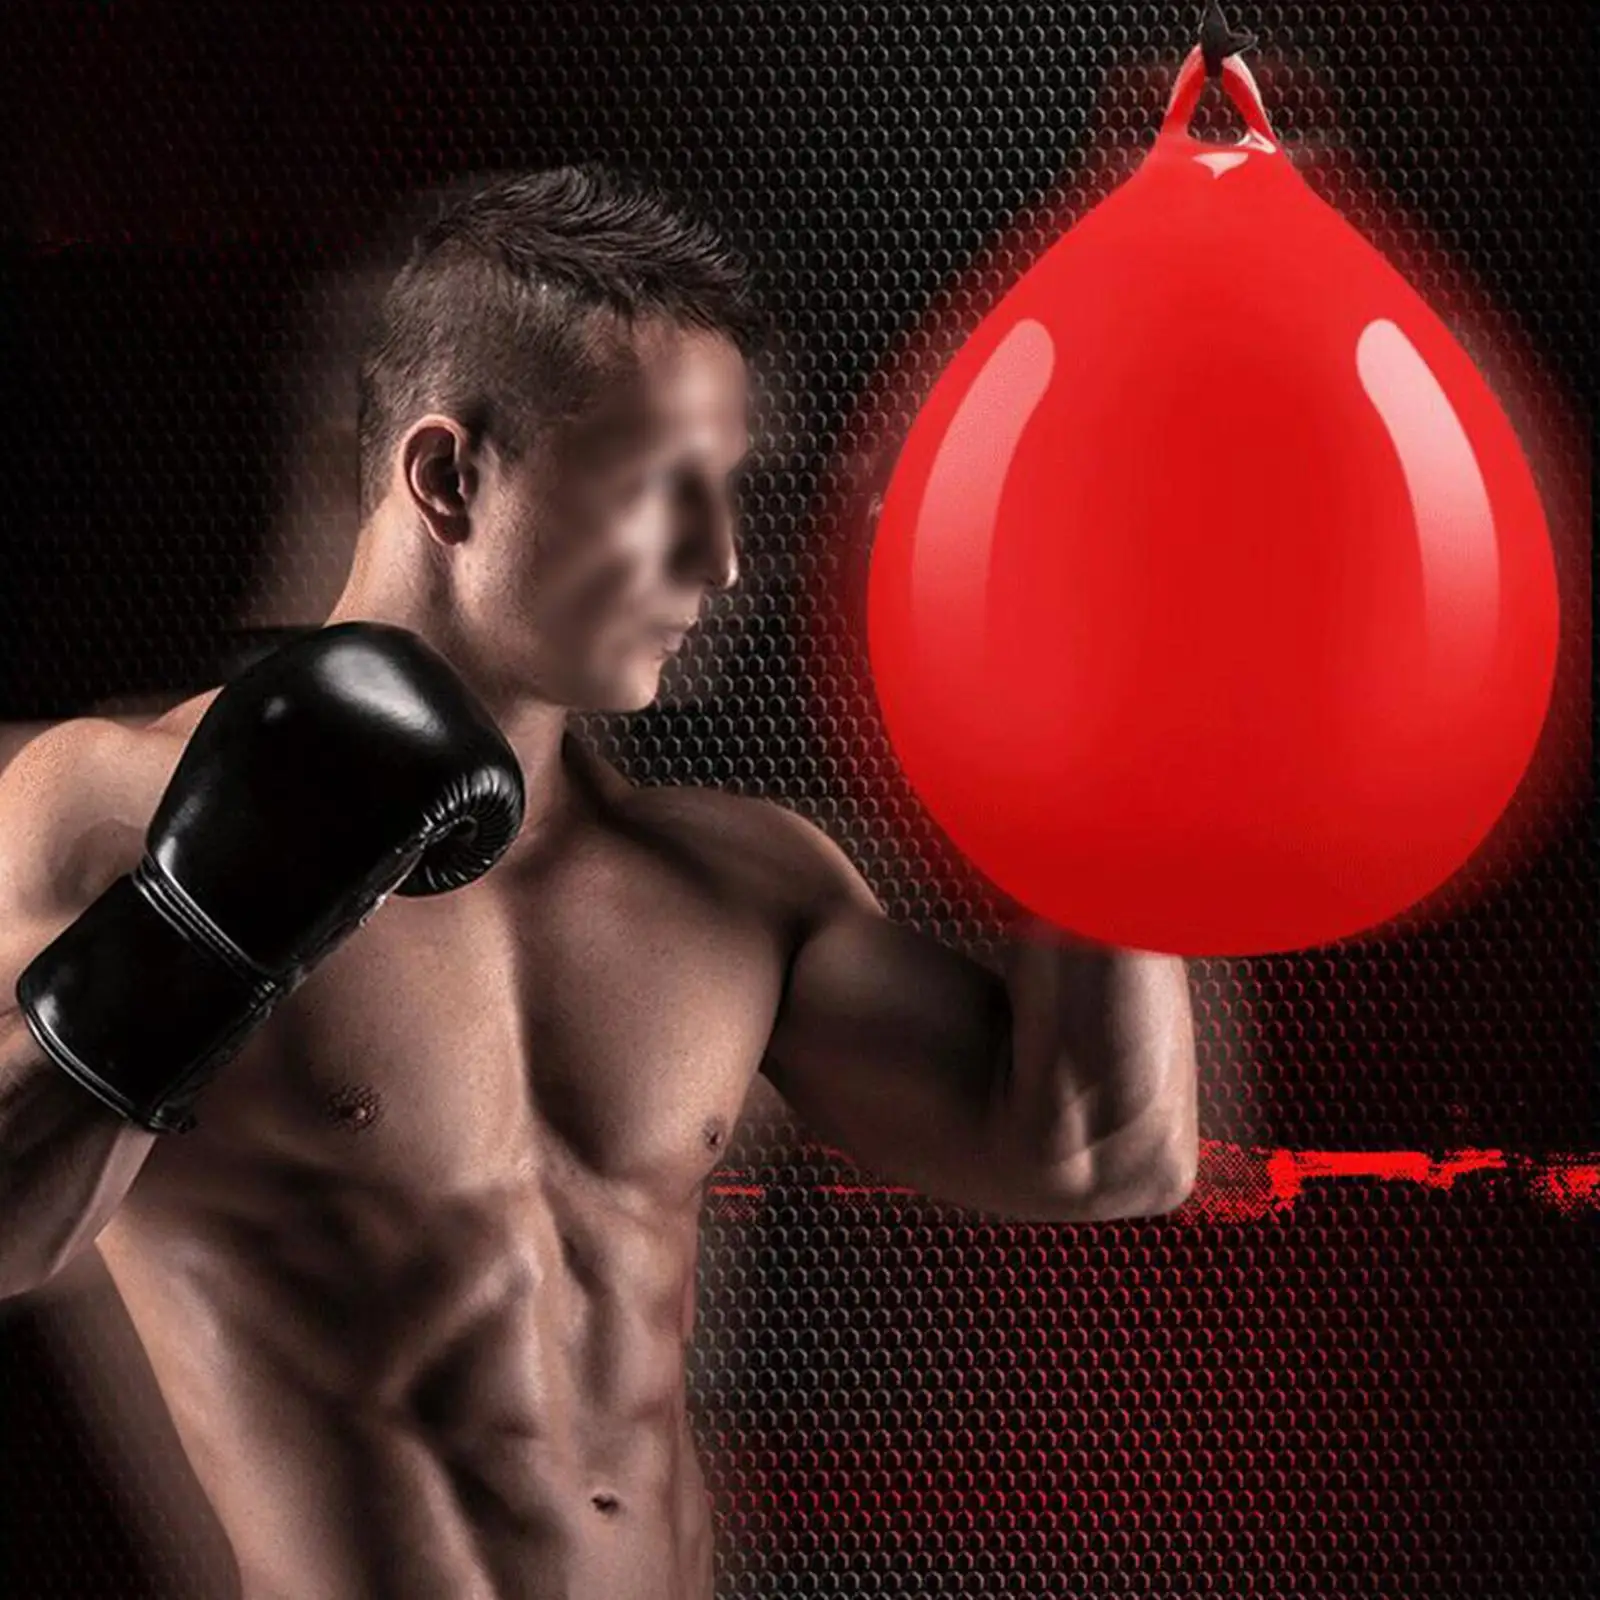 Water Injection Heavy Bag Filled with Water Water Punching Bag Punch Bag for Men Women Sports Training Equipment Karate Gifts